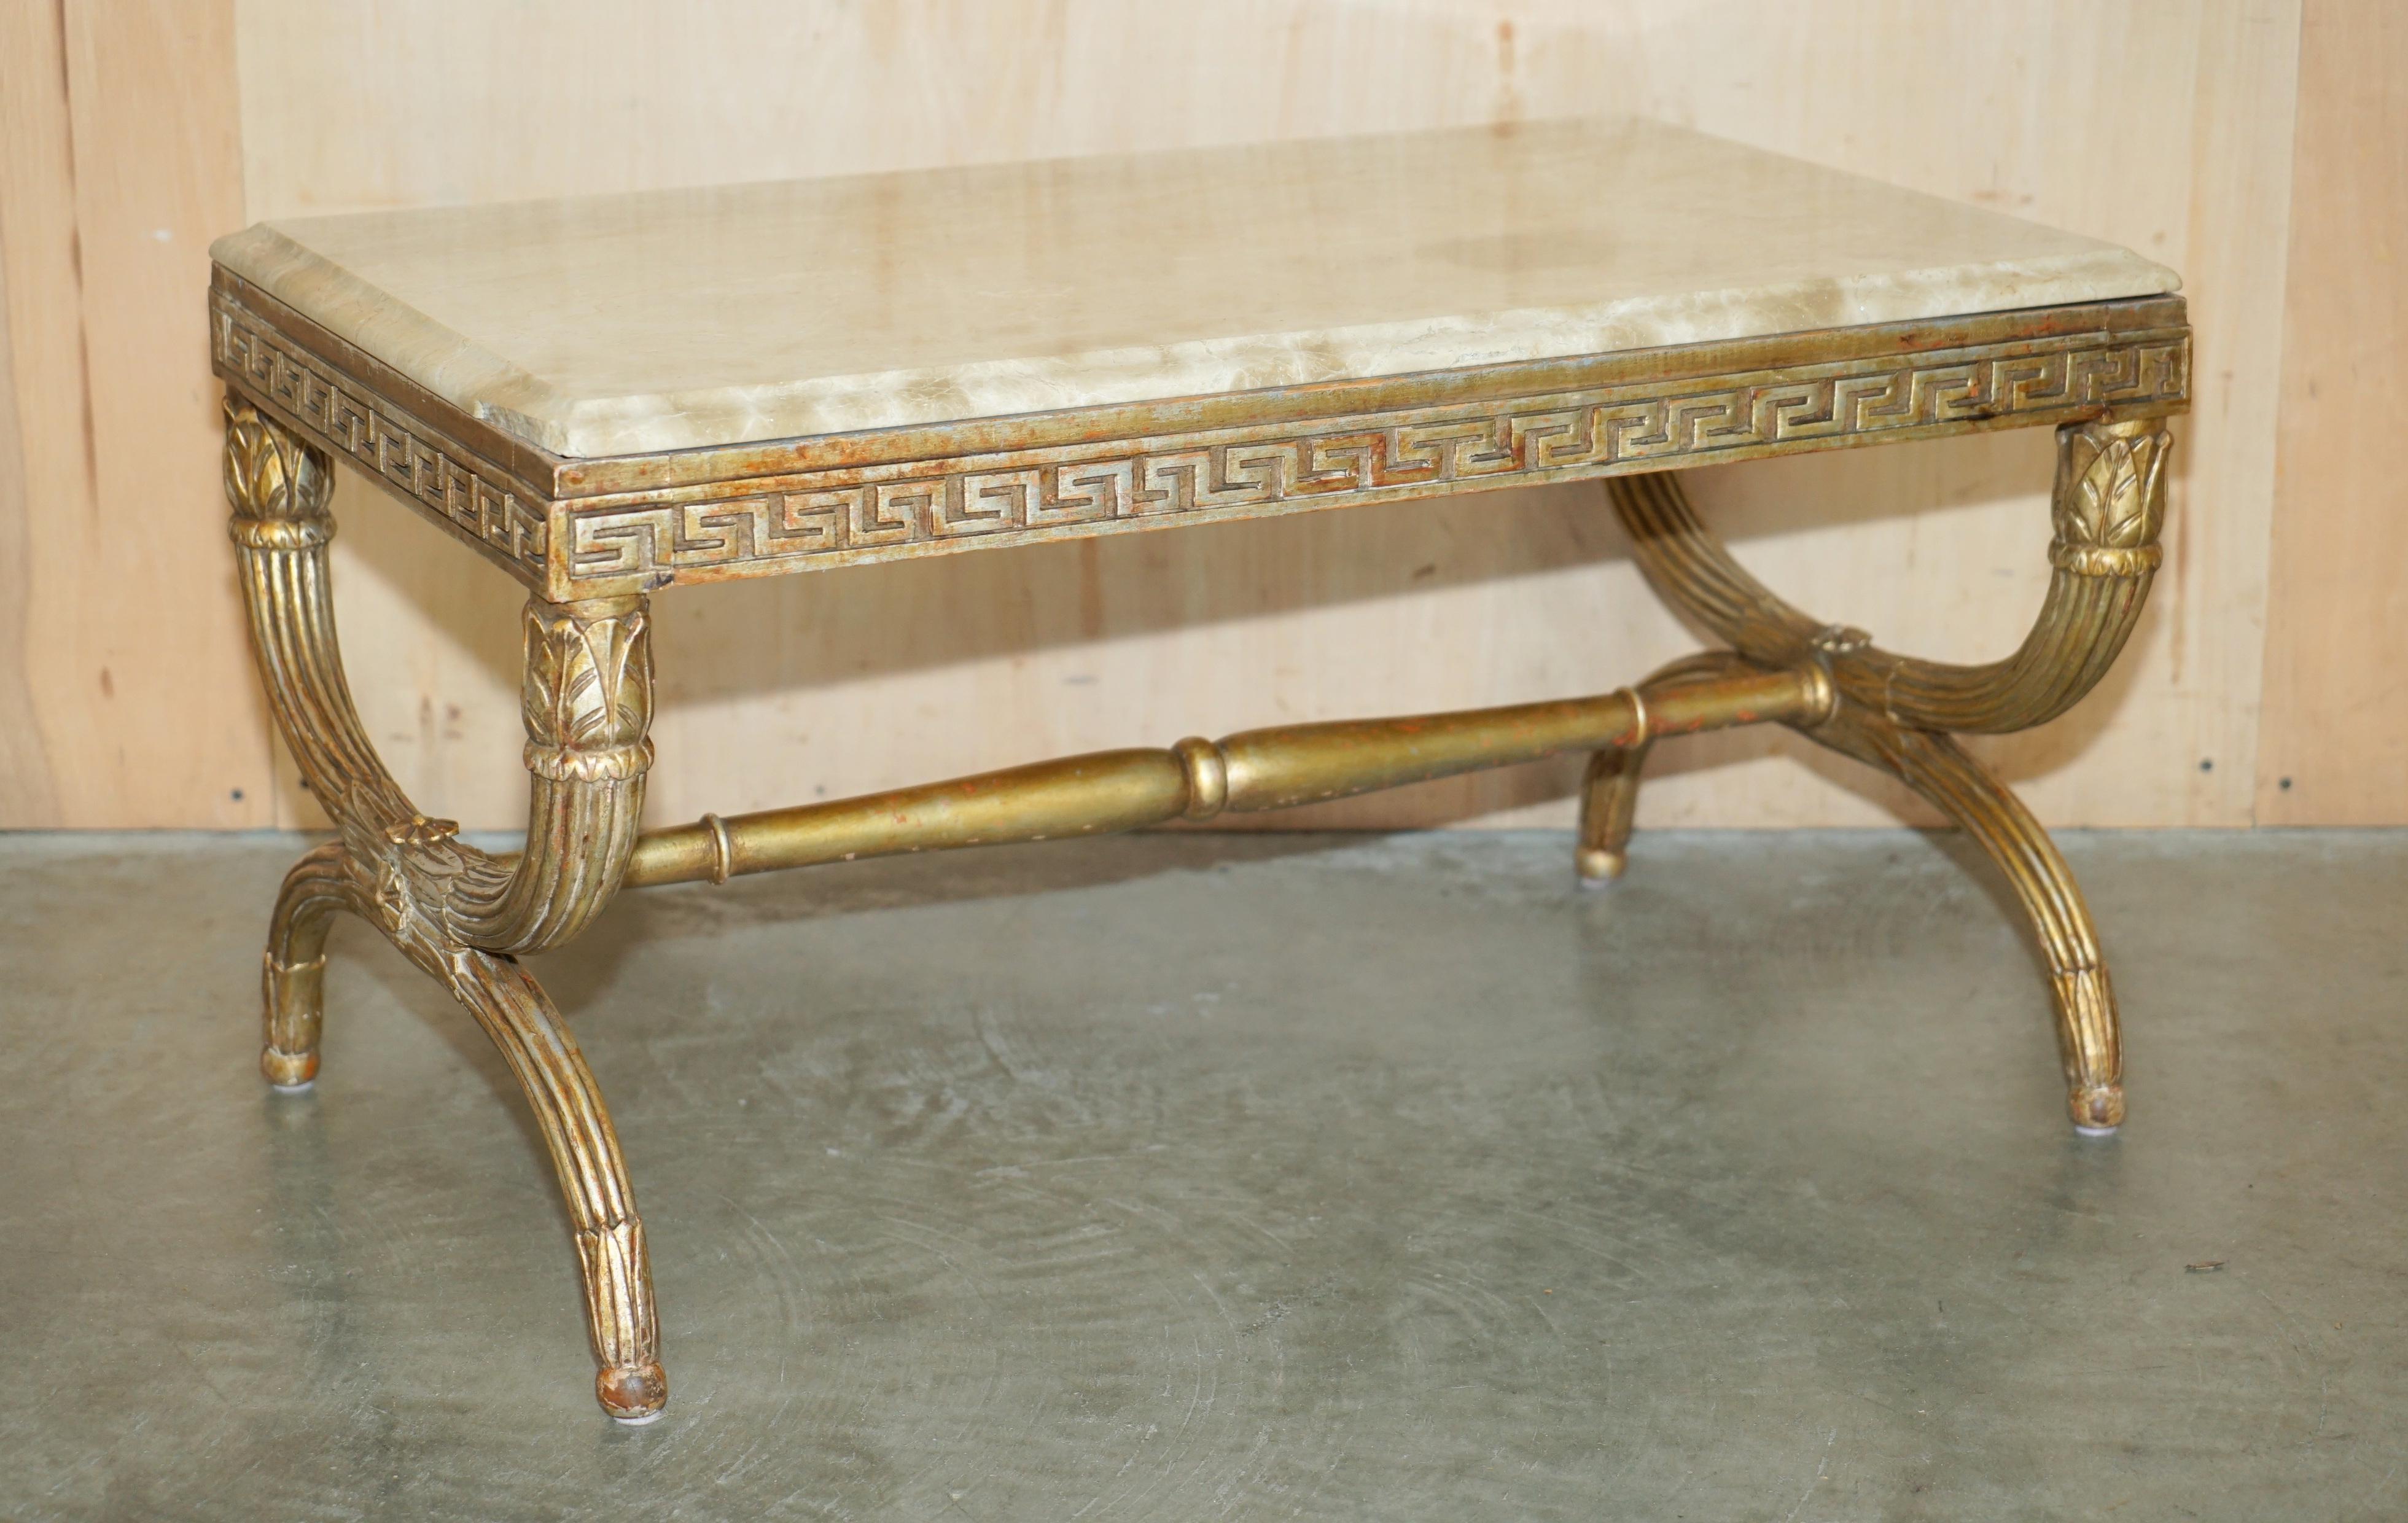 Royal House Antiques

Royal House Antiques is delighted to offer for sale this absolutely exquisite circa 1860-1880 hand made in Italy marble and hand carved giltwood coffee or cocktail table with thick marble top

Please note the delivery fee